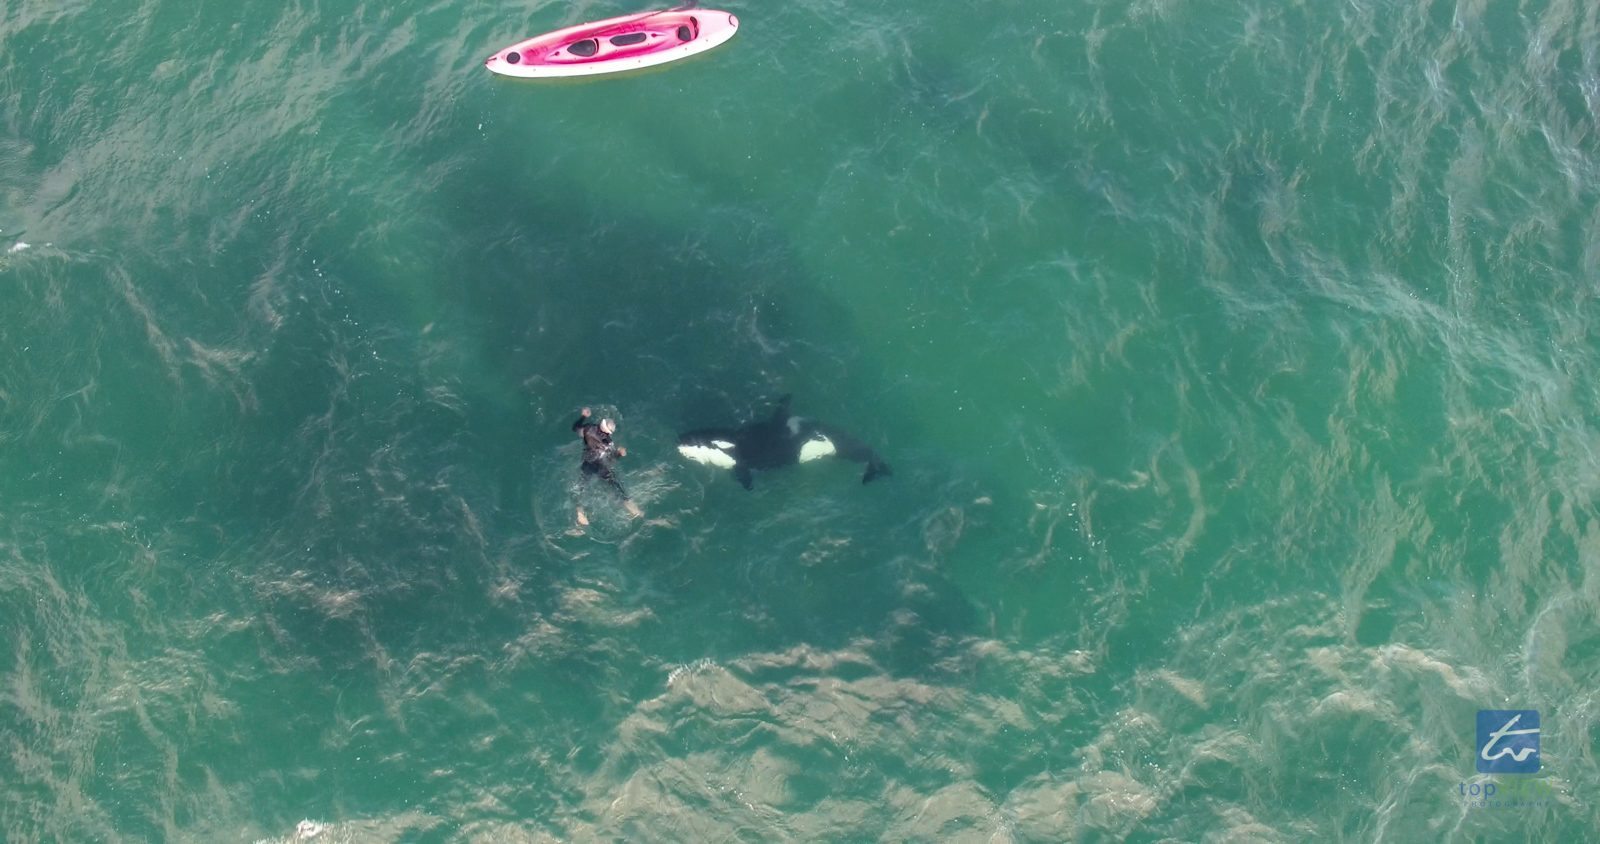 Orca with Kayaker / snorkeler in Army Bay, Auckland, New Zealand